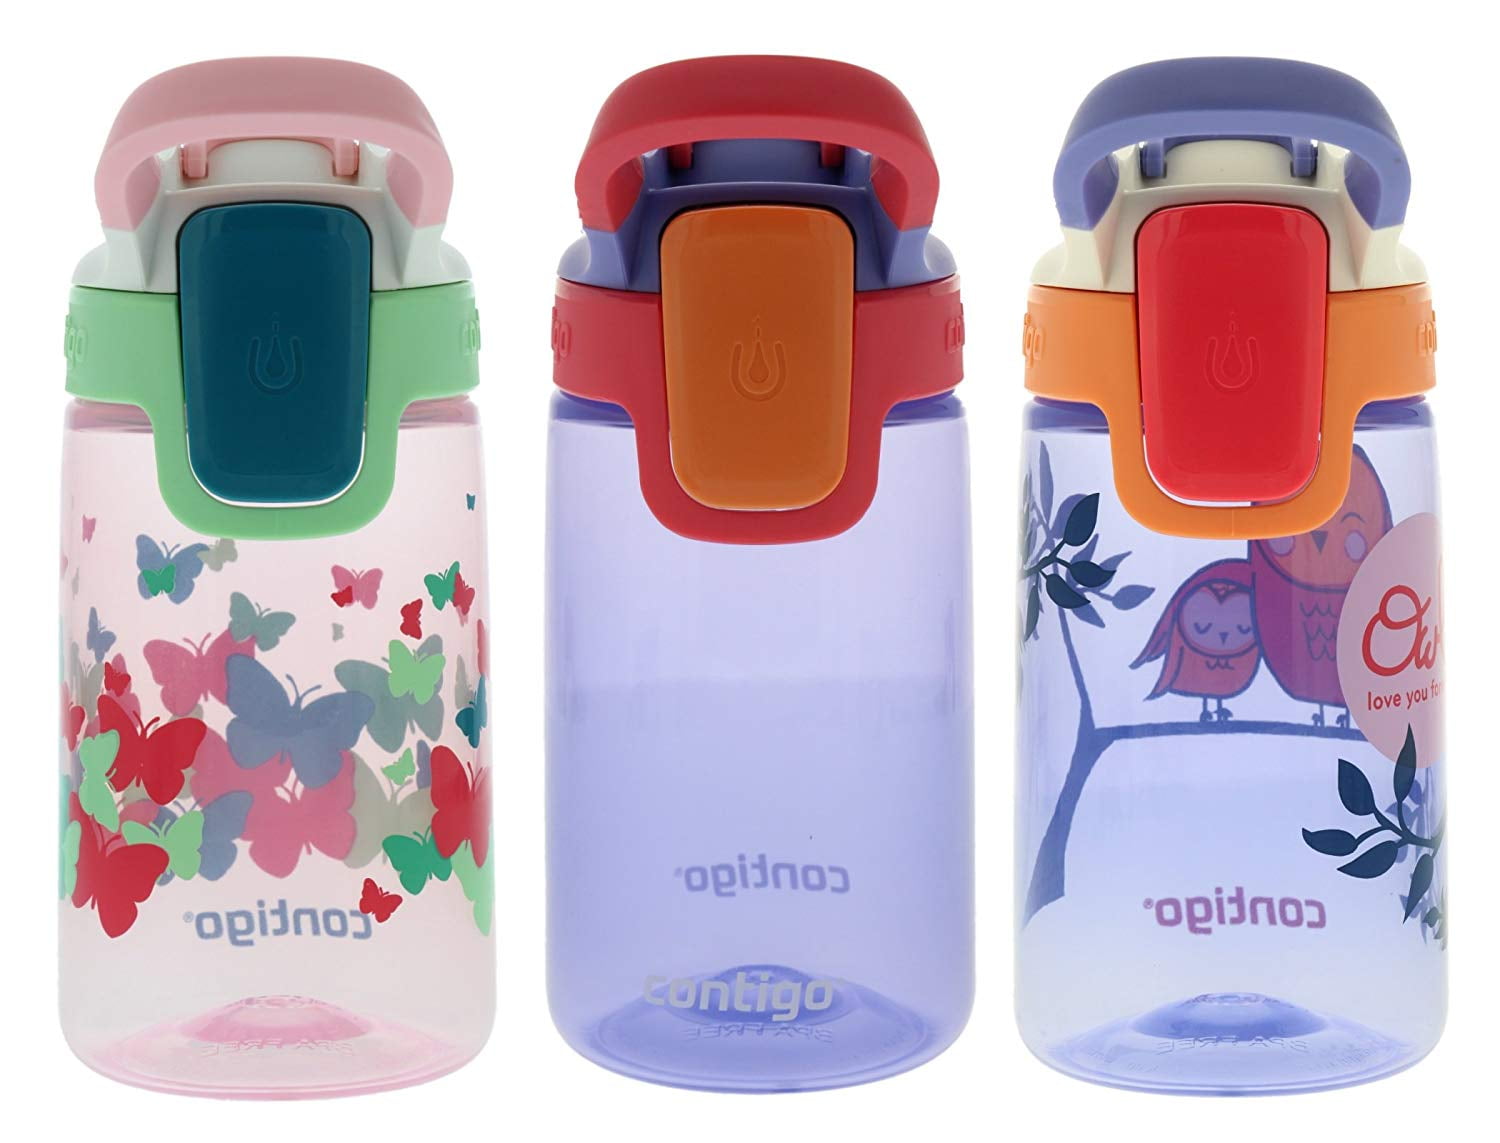 3-Pack Contigo Water Bottles for $16.97 :: Southern Savers